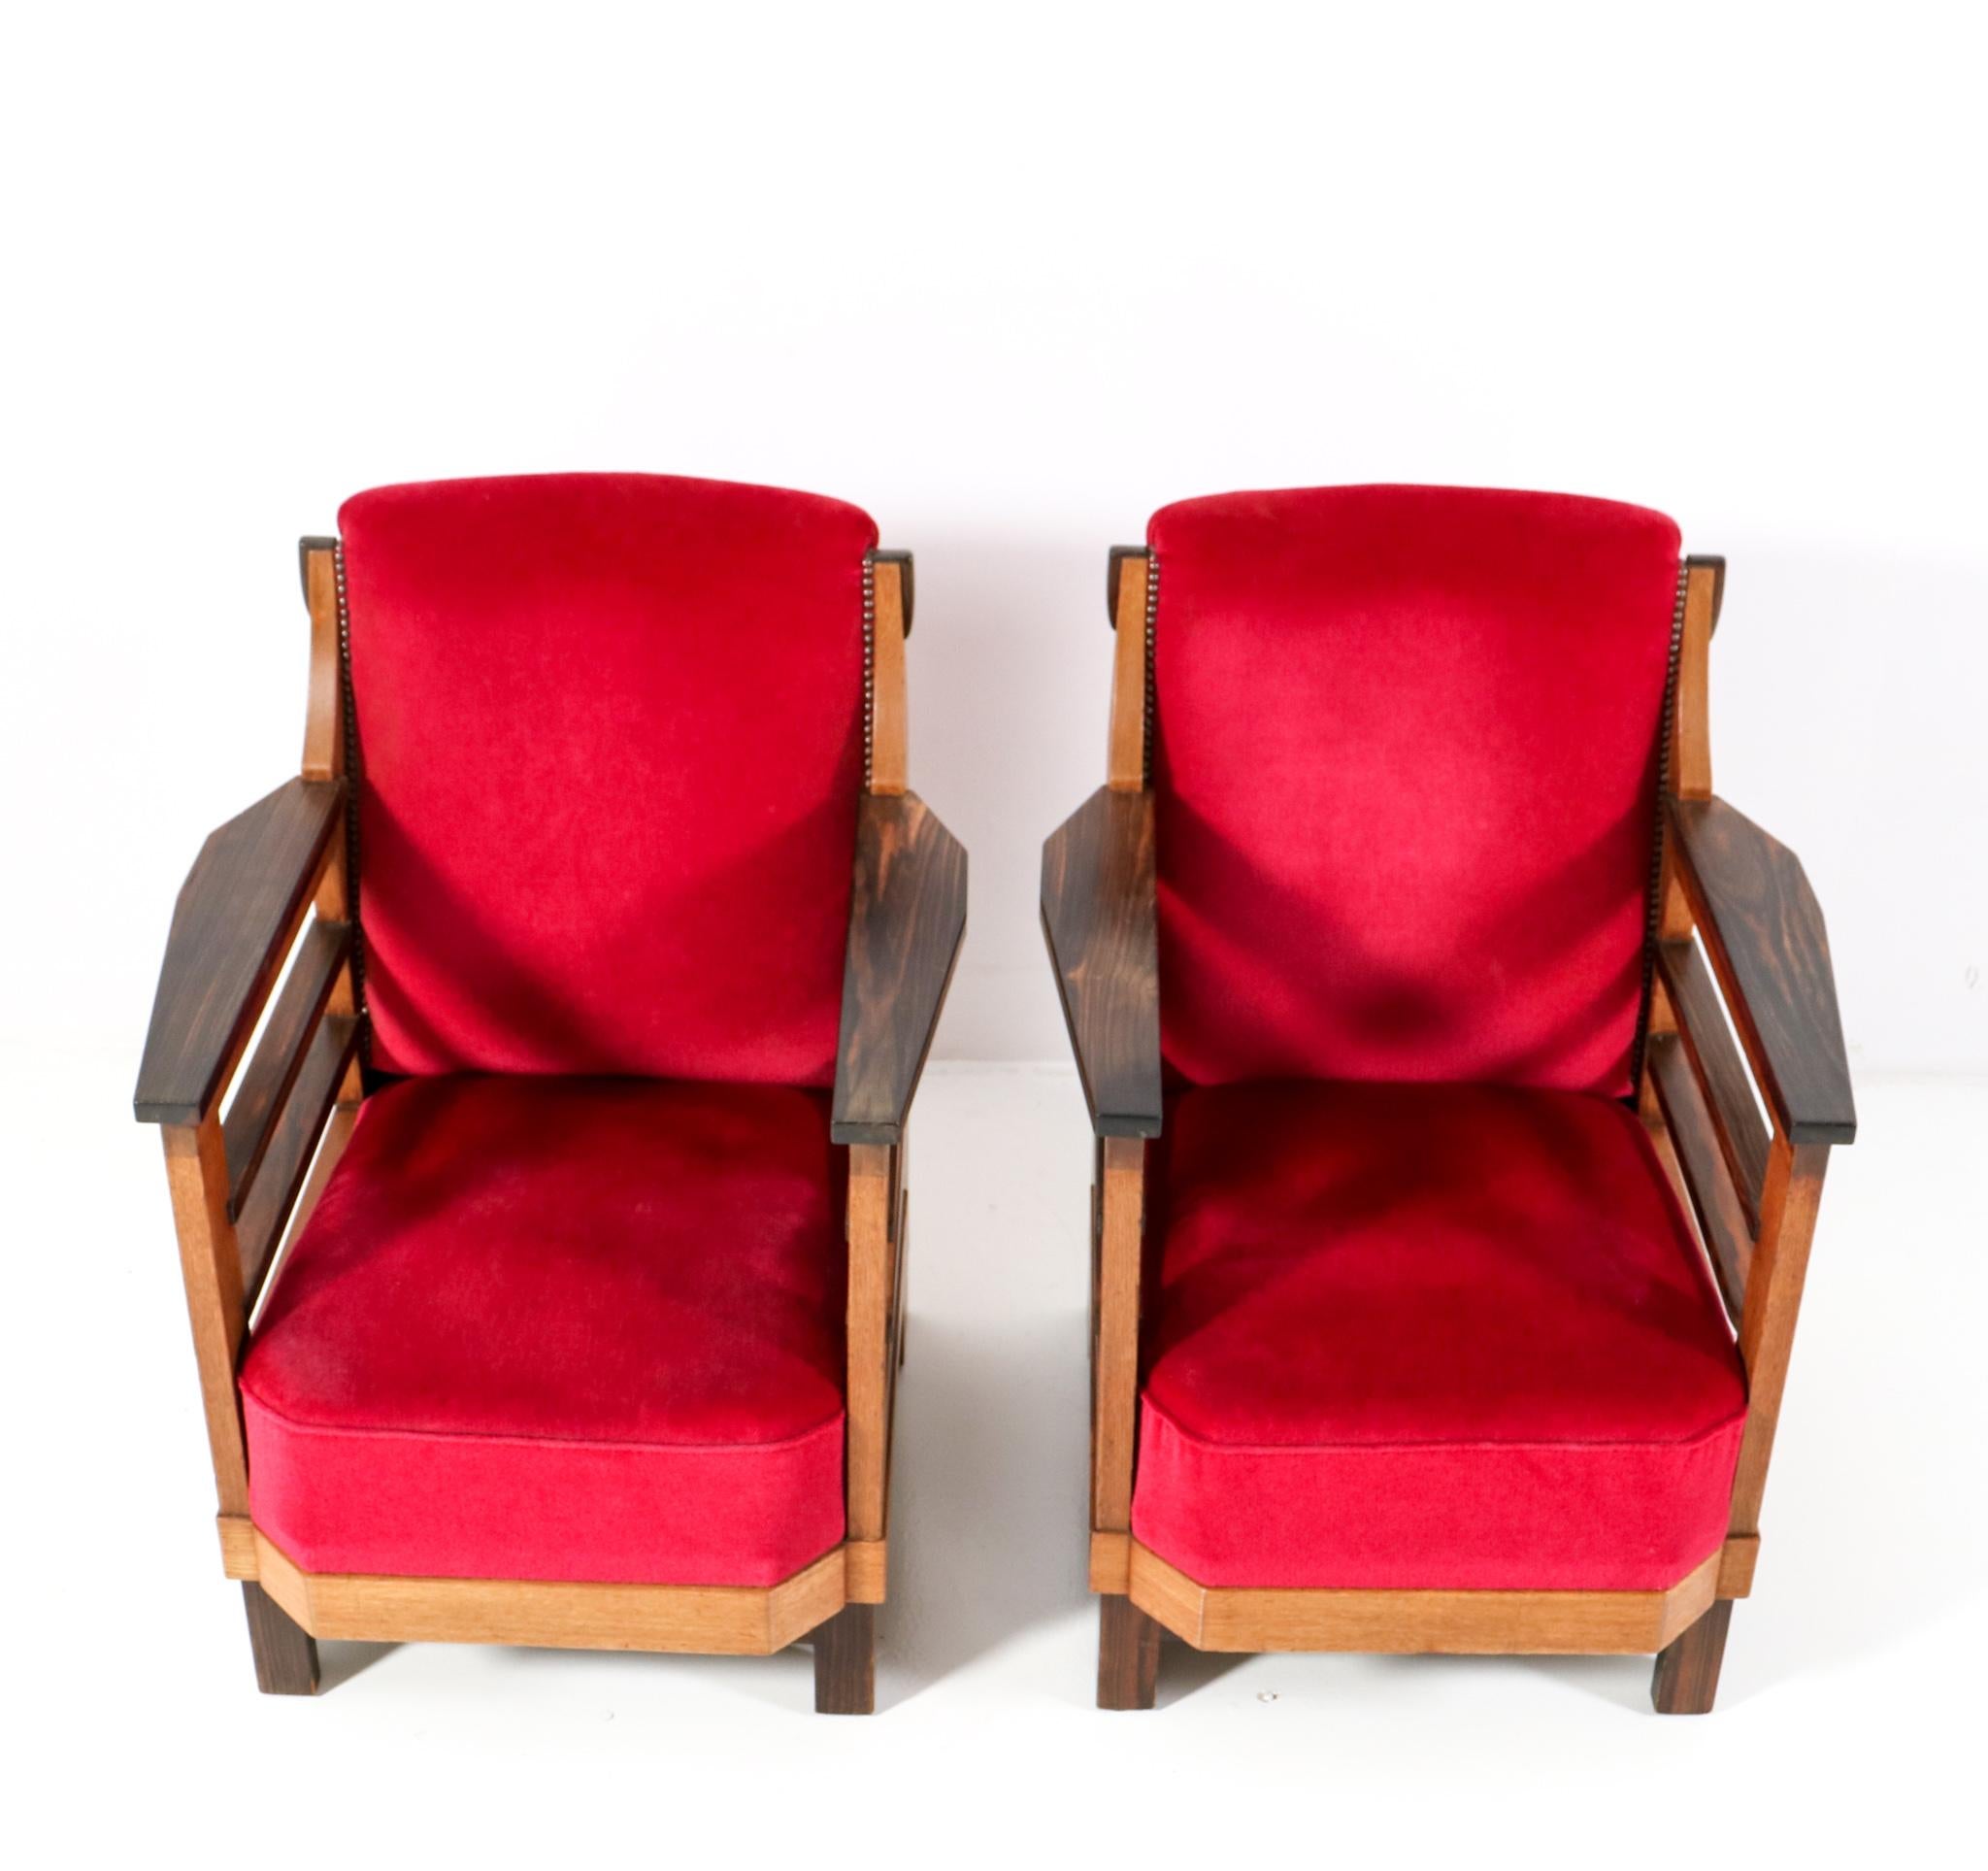 Early 20th Century Pair of Art Deco Amsterdamse School Lounge Chairs by Anton Lucas Leiden, 1920s